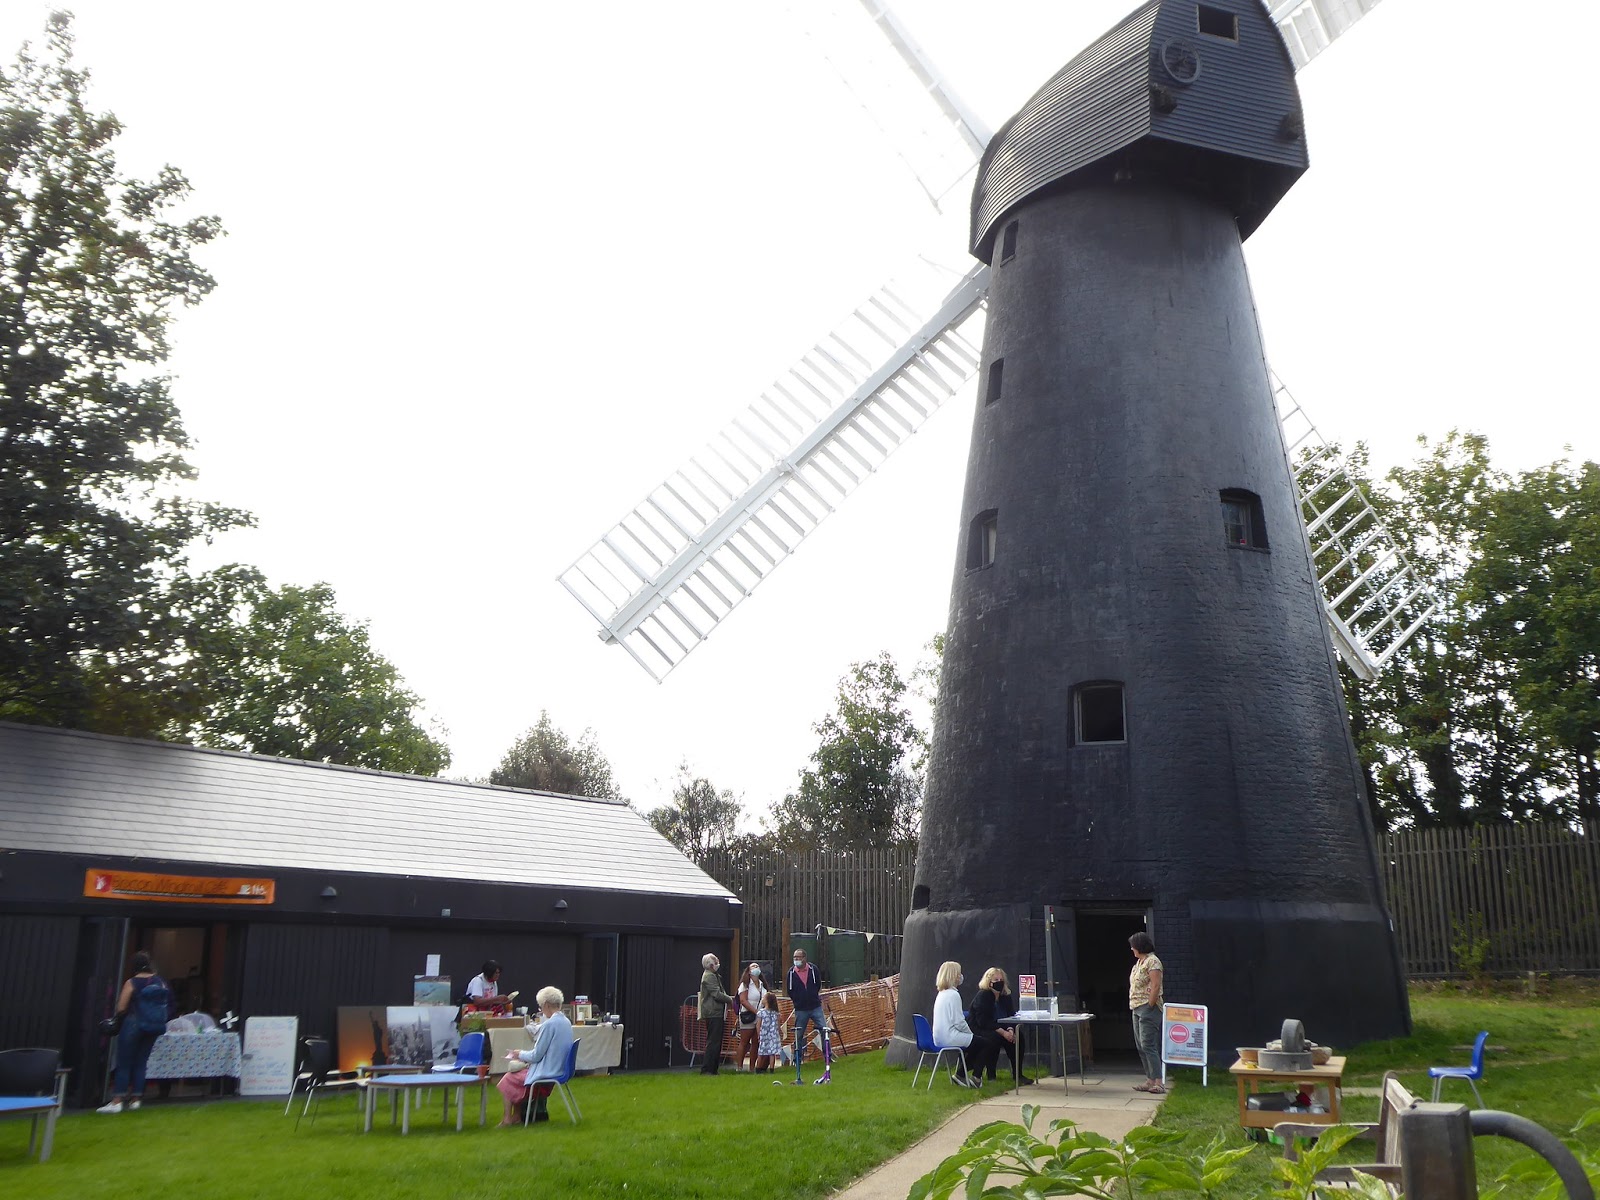 INSPIRED Blog Series: Brixton Windmill - The Glass-House